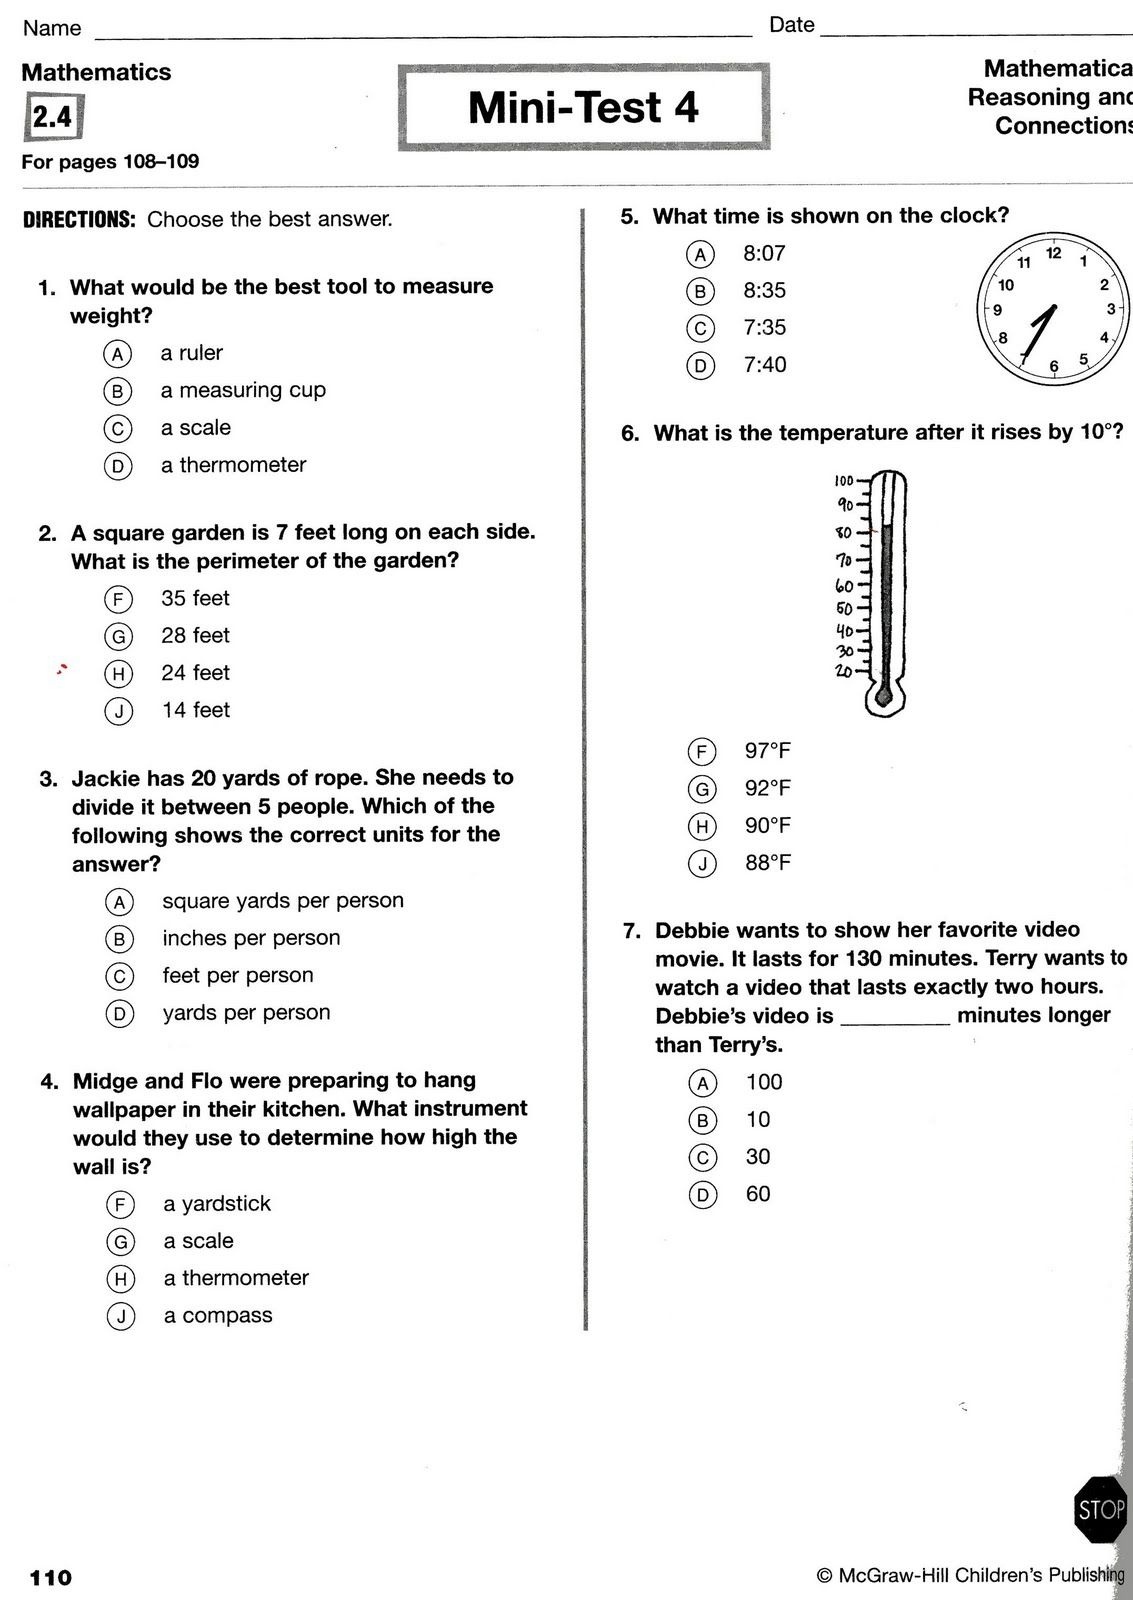 Free 1St Grade Assessment Tests | Closet Of Free Samples | Get Free - Free Printable College Placement Test